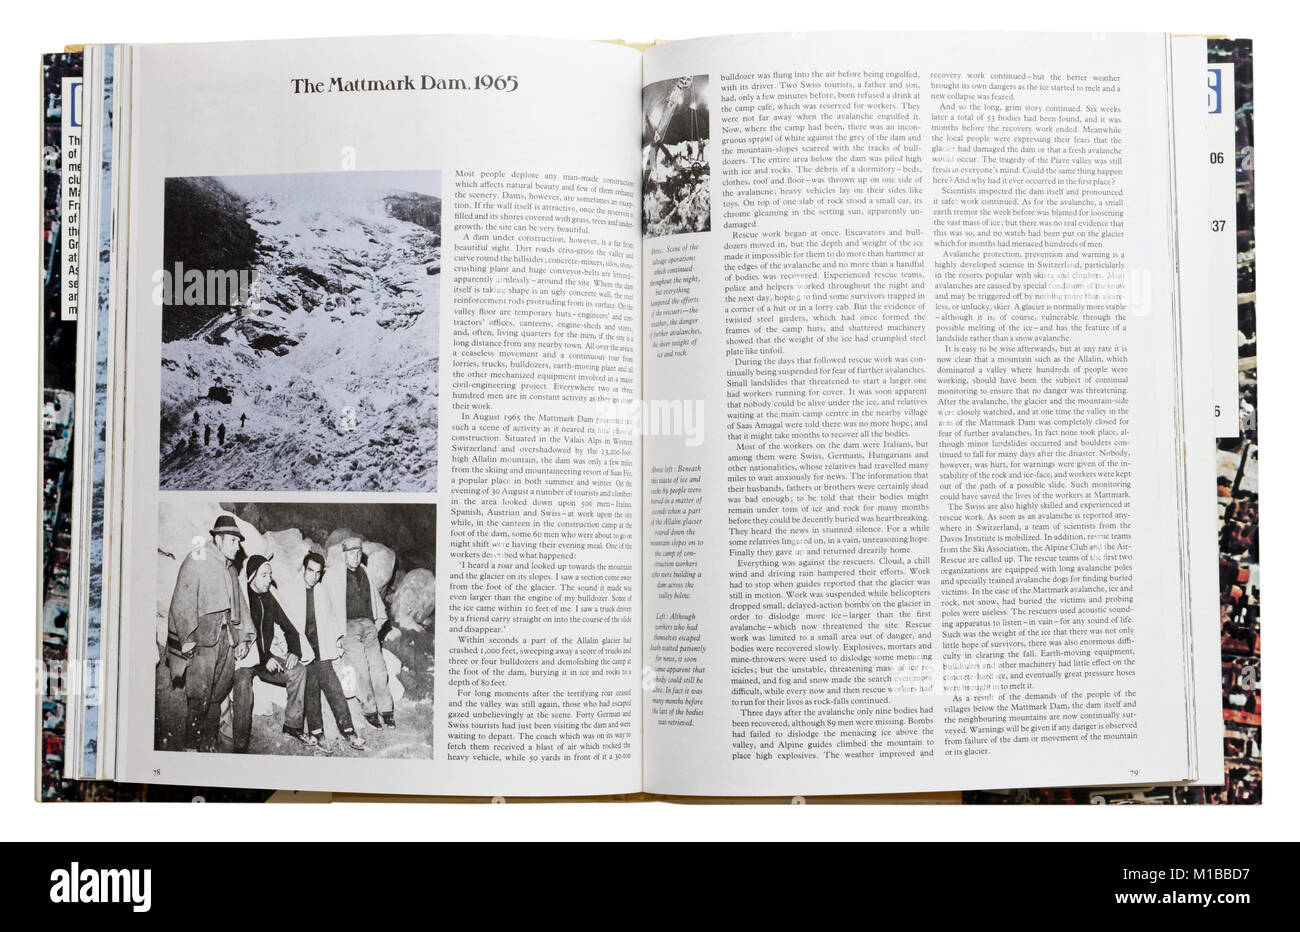 A book of disasters open to the page about the 1965 Mattmark Dam avalanche Stock Photo